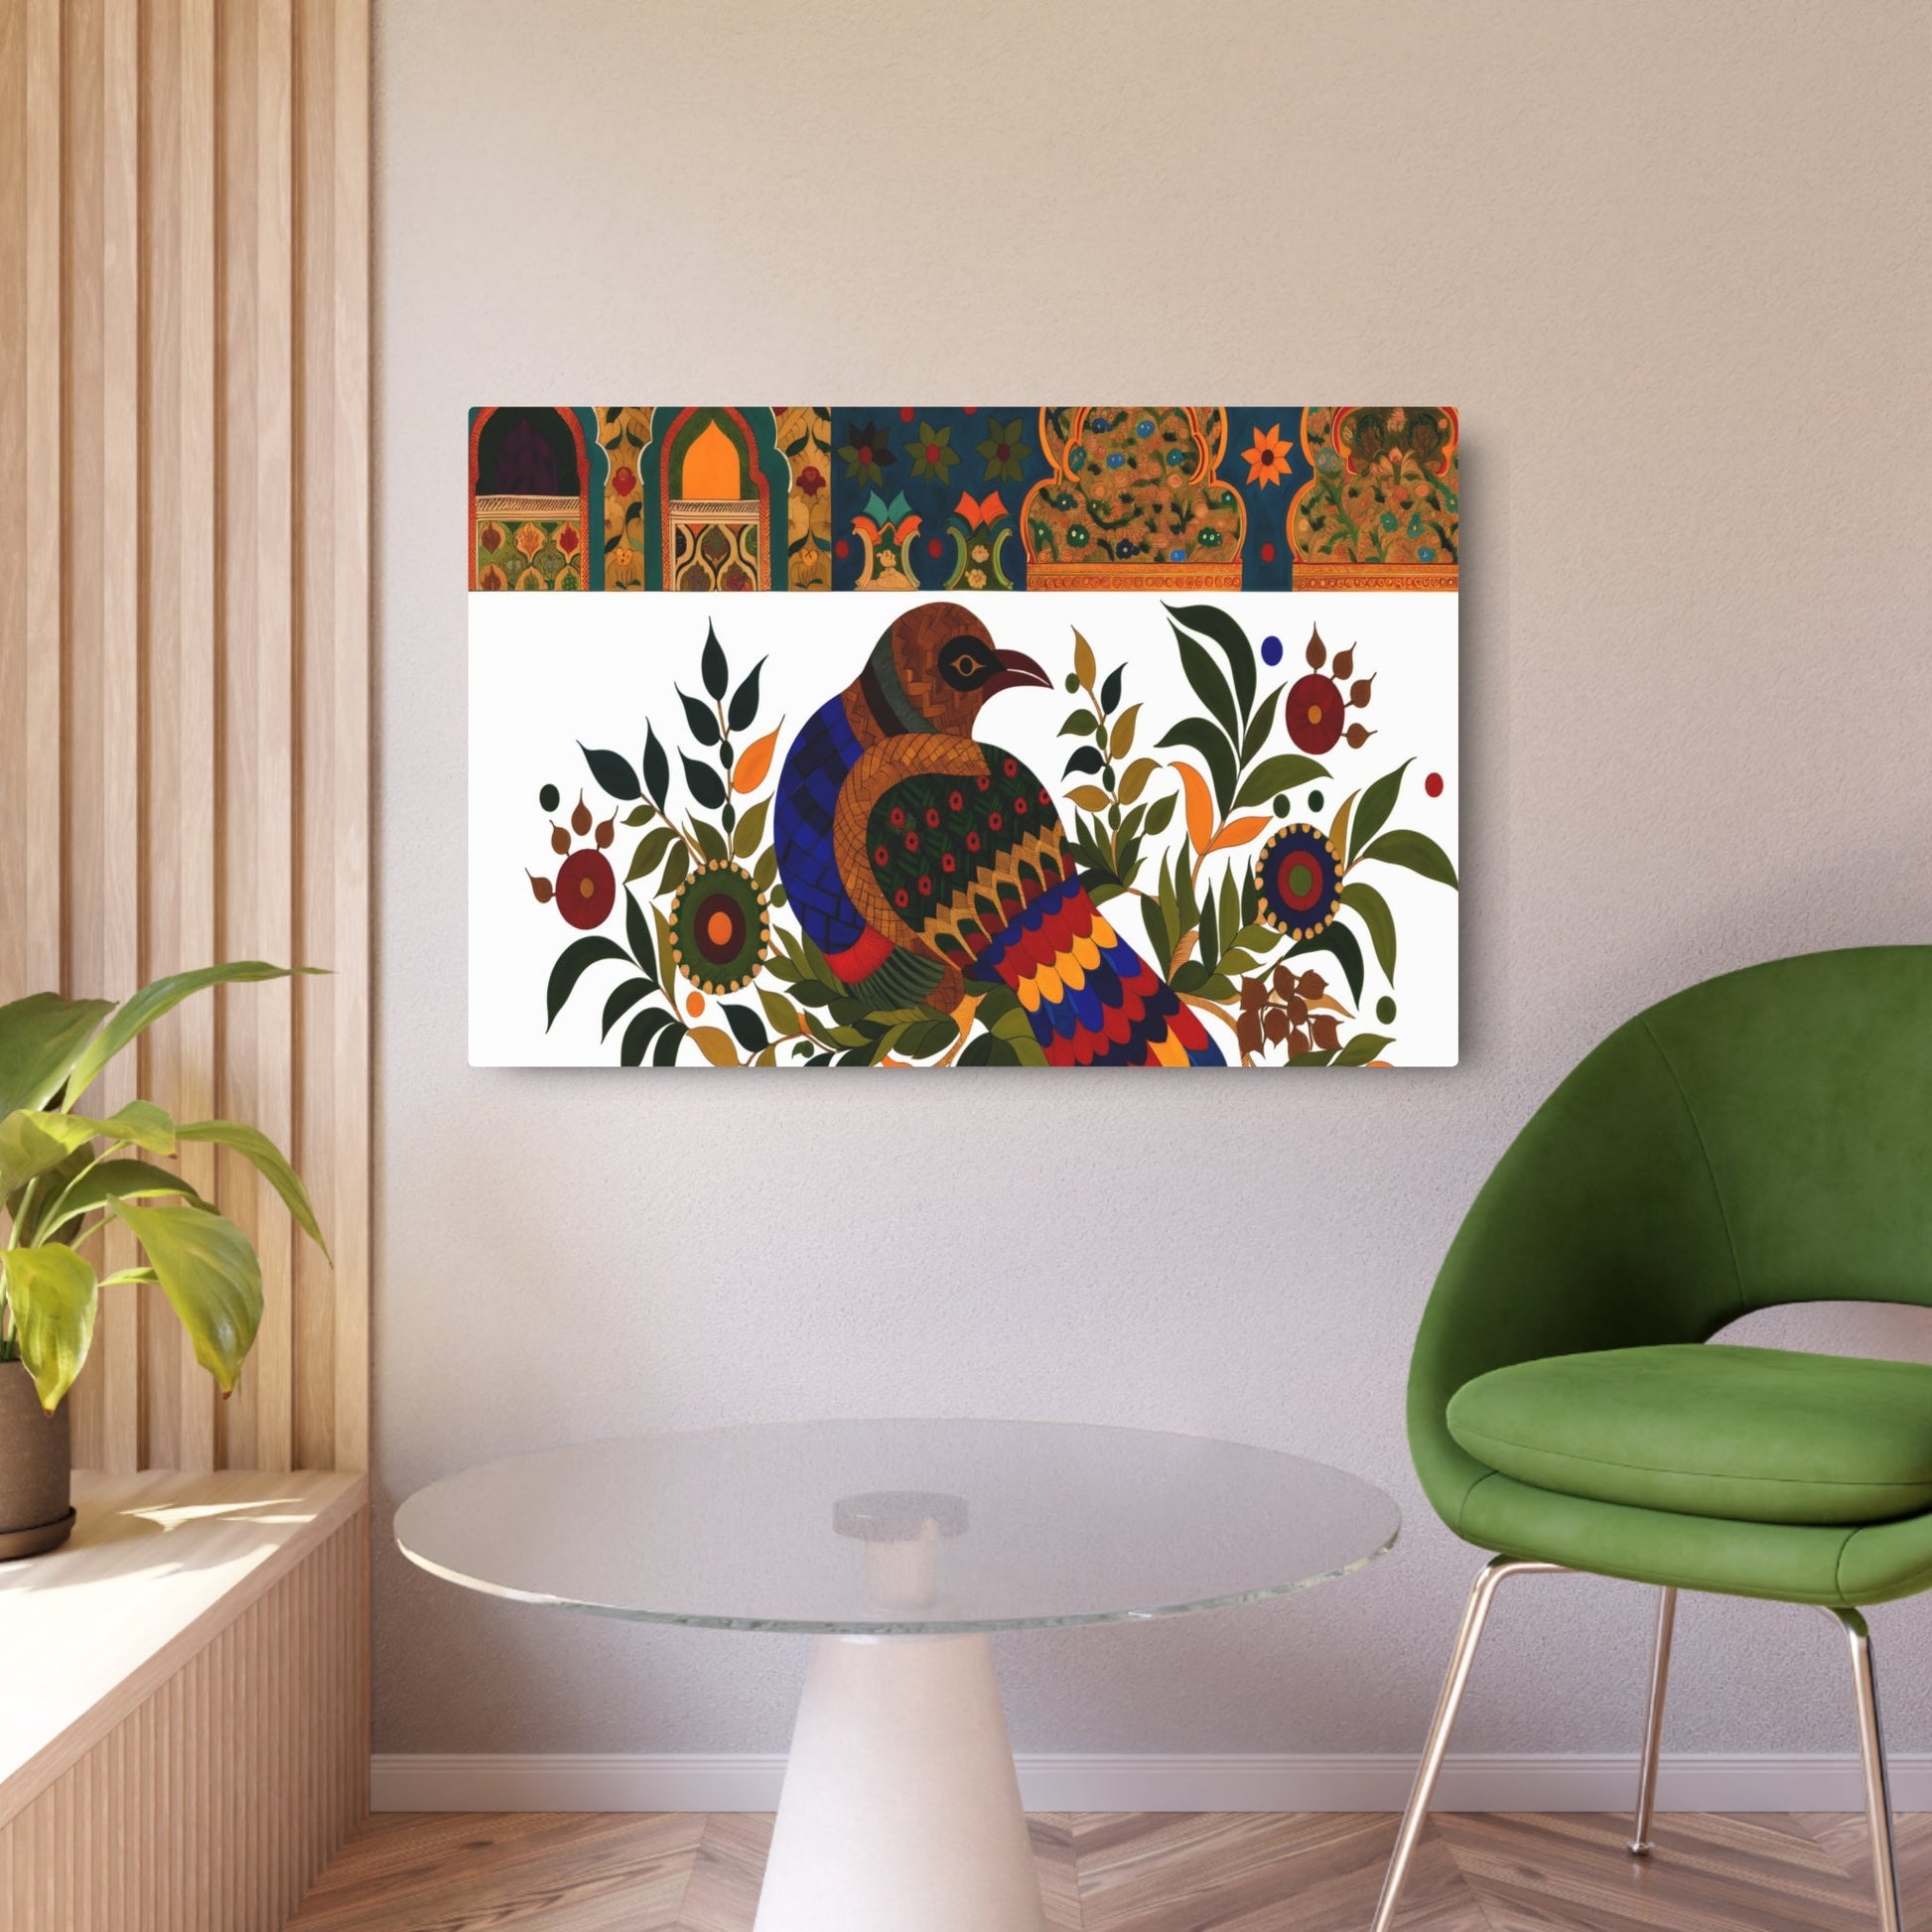 Metal Poster Art | "Mughal Miniature South Asian Art - Vibrant Bird-Centric Painting with Ornate Patterns and Architectural Details Reflecting Mughal Era Op - Metal Poster Art 36″ x 24″ (Horizontal) 0.12''